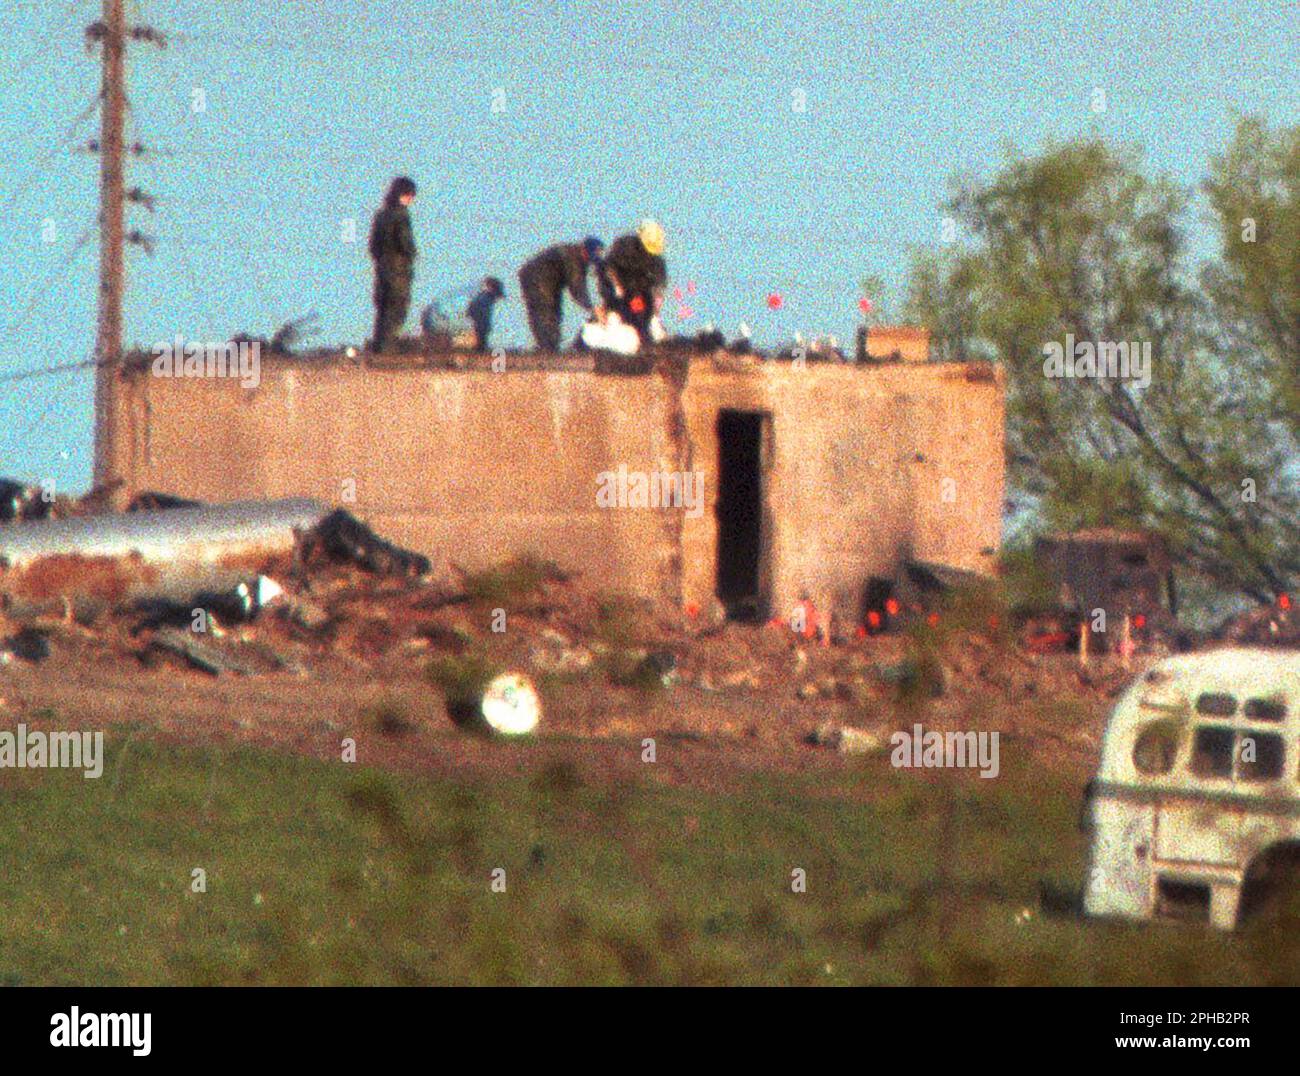 Waco, Texas USA, April 21, 1993: Federal agents load bodies into body bags on top of the bunker at the Branch Davidian compound two days after a devastating fire killed 76 members holed up at the religious cult's property and ended a 51-day standoff with federal law enforcement agencies. ©Bob Daemmrich Stock Photo